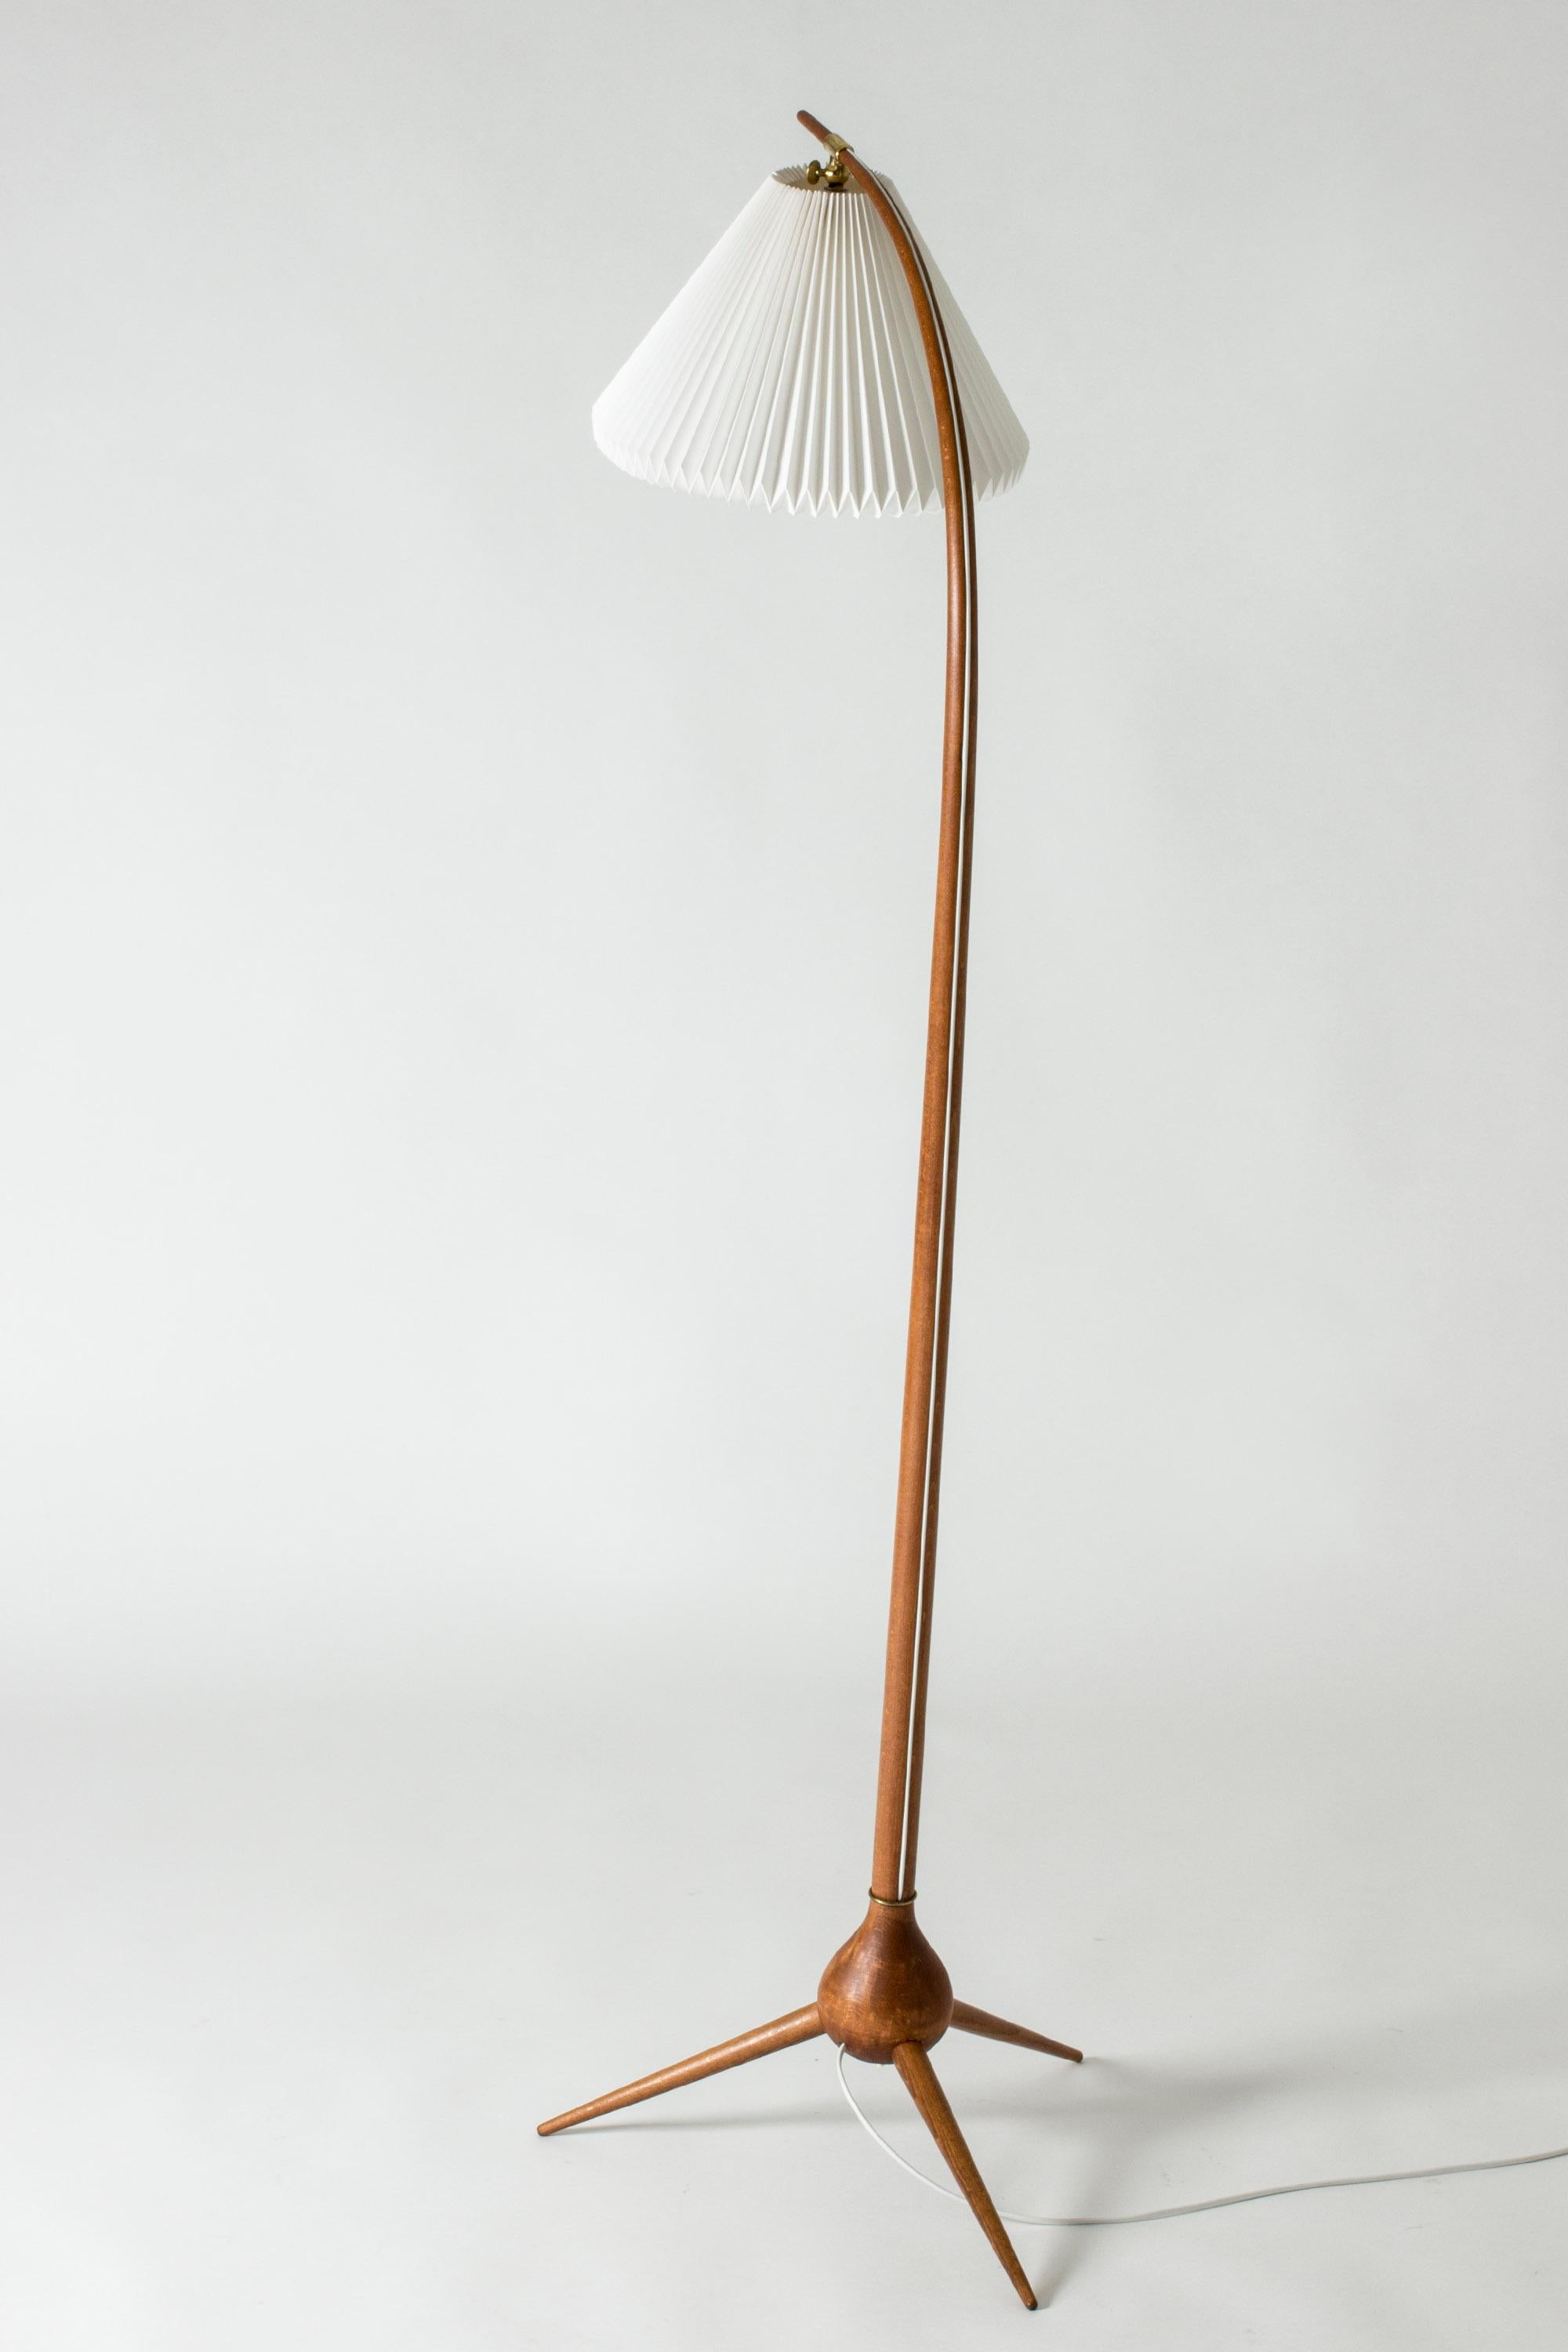 Amazing “Bridge” floor lamp by Severin Hansen. The stem is made from teak bent into an elegant curve, with the cord visible running along the back. Three feet in an onion-shaped joint with a brass detail. Beautiful, organic design, Le Klint lamp